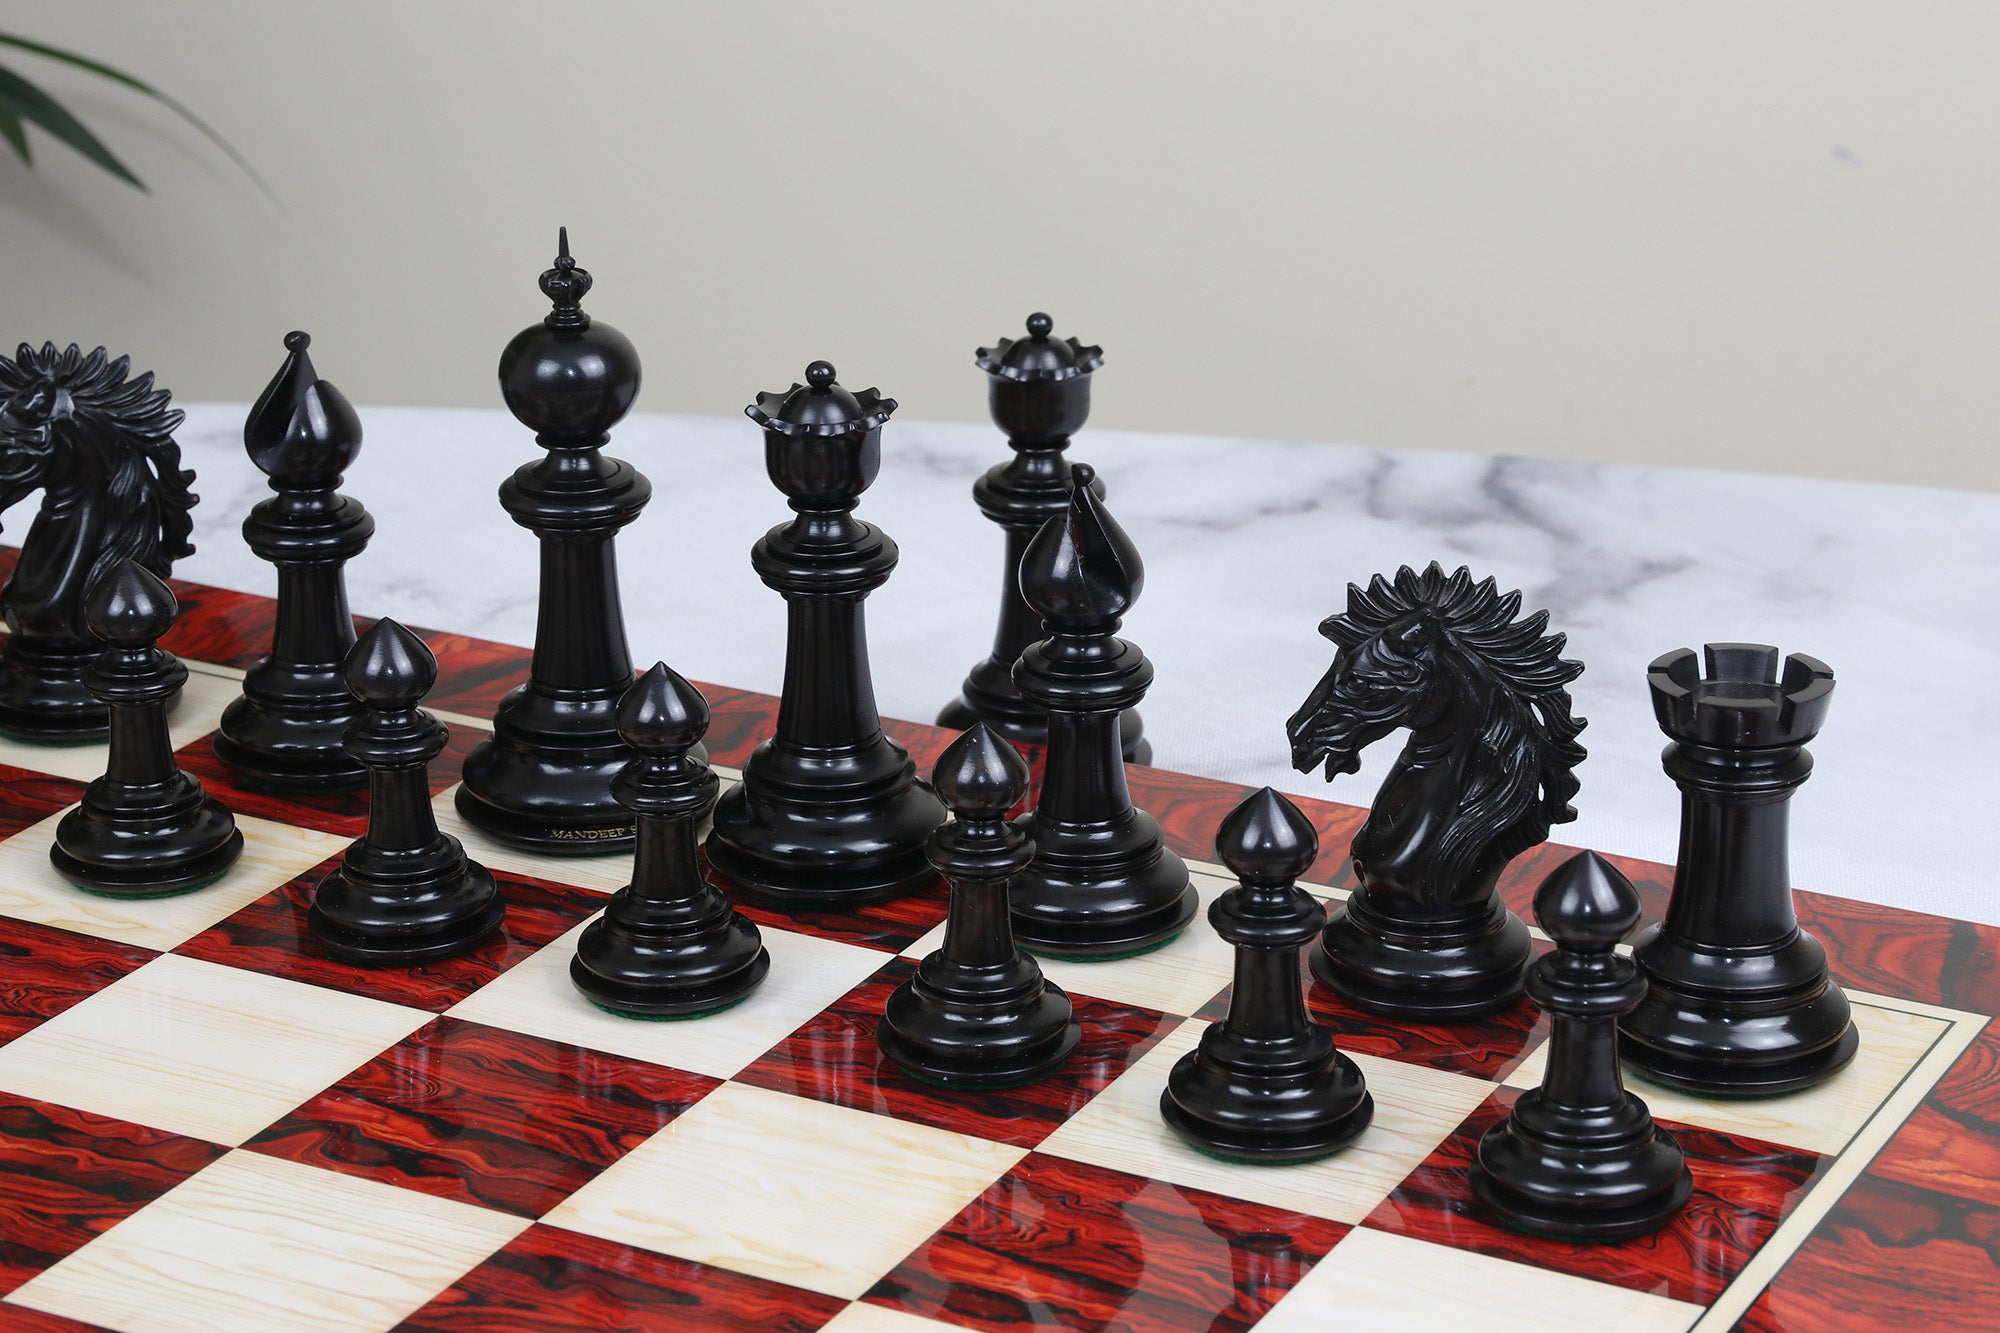 The Emperor Series Chess Pieces , Pearl White & Royal Blue Lacquered, 4.4  King